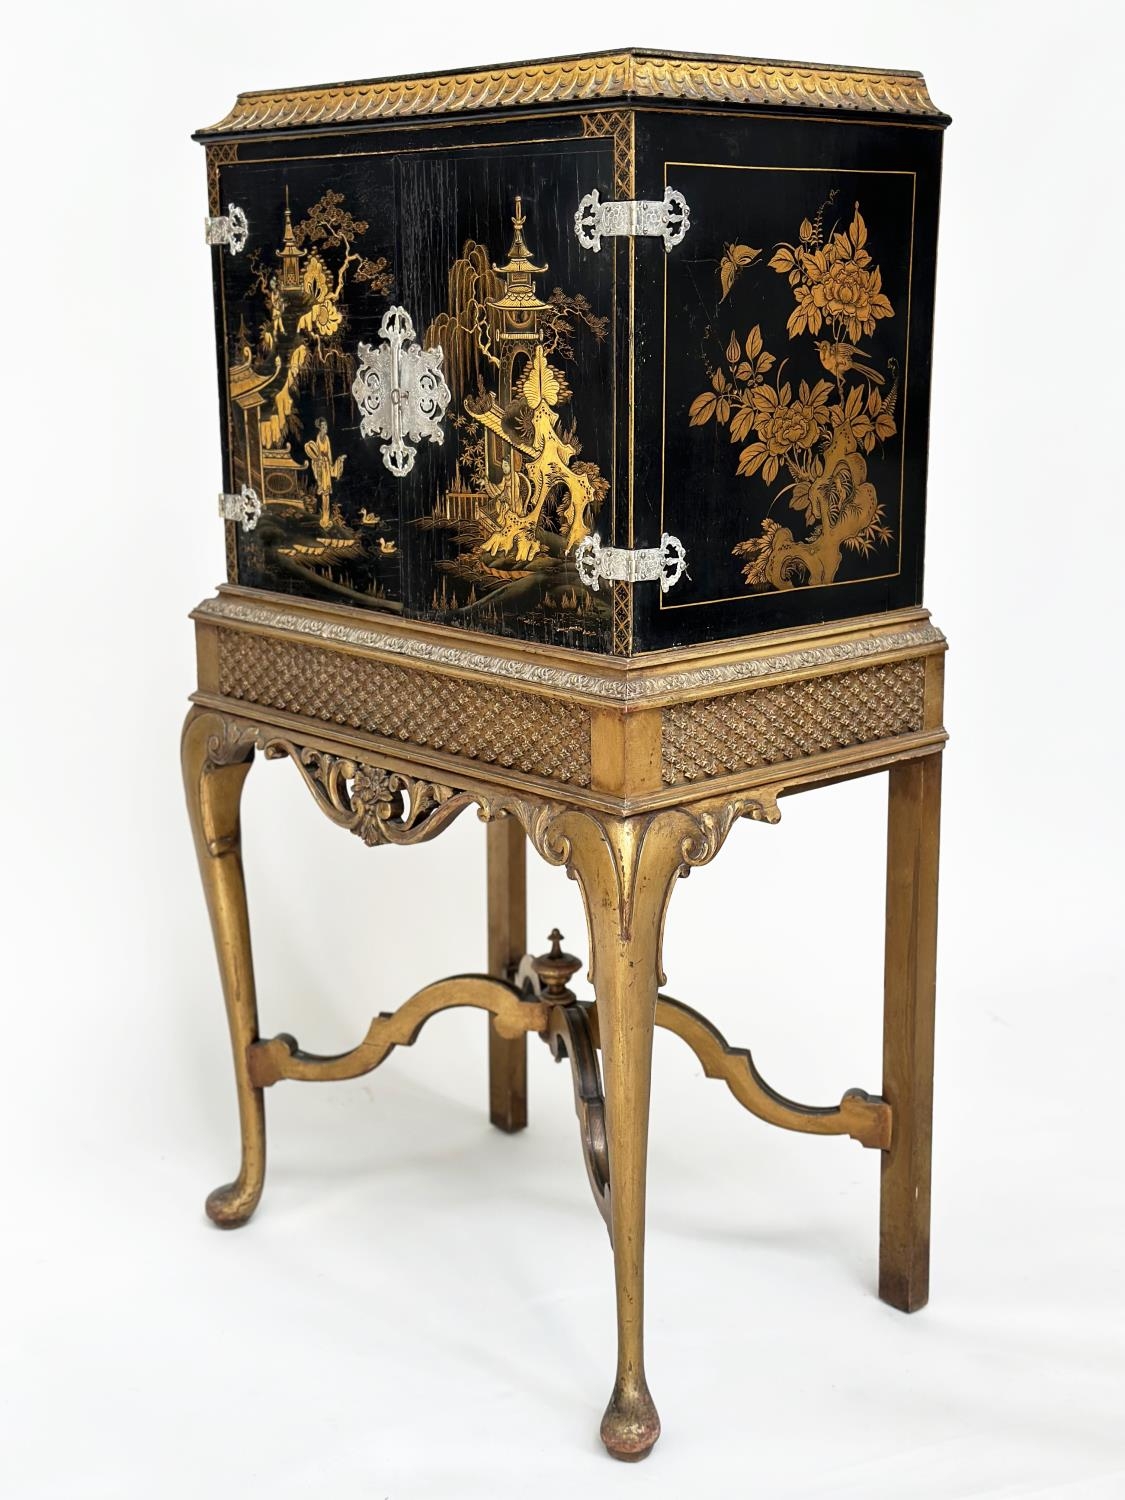 CABINET ON STAND, early 20th century English lacquered and gilt chinoiserie decorated, silvered - Image 10 of 11